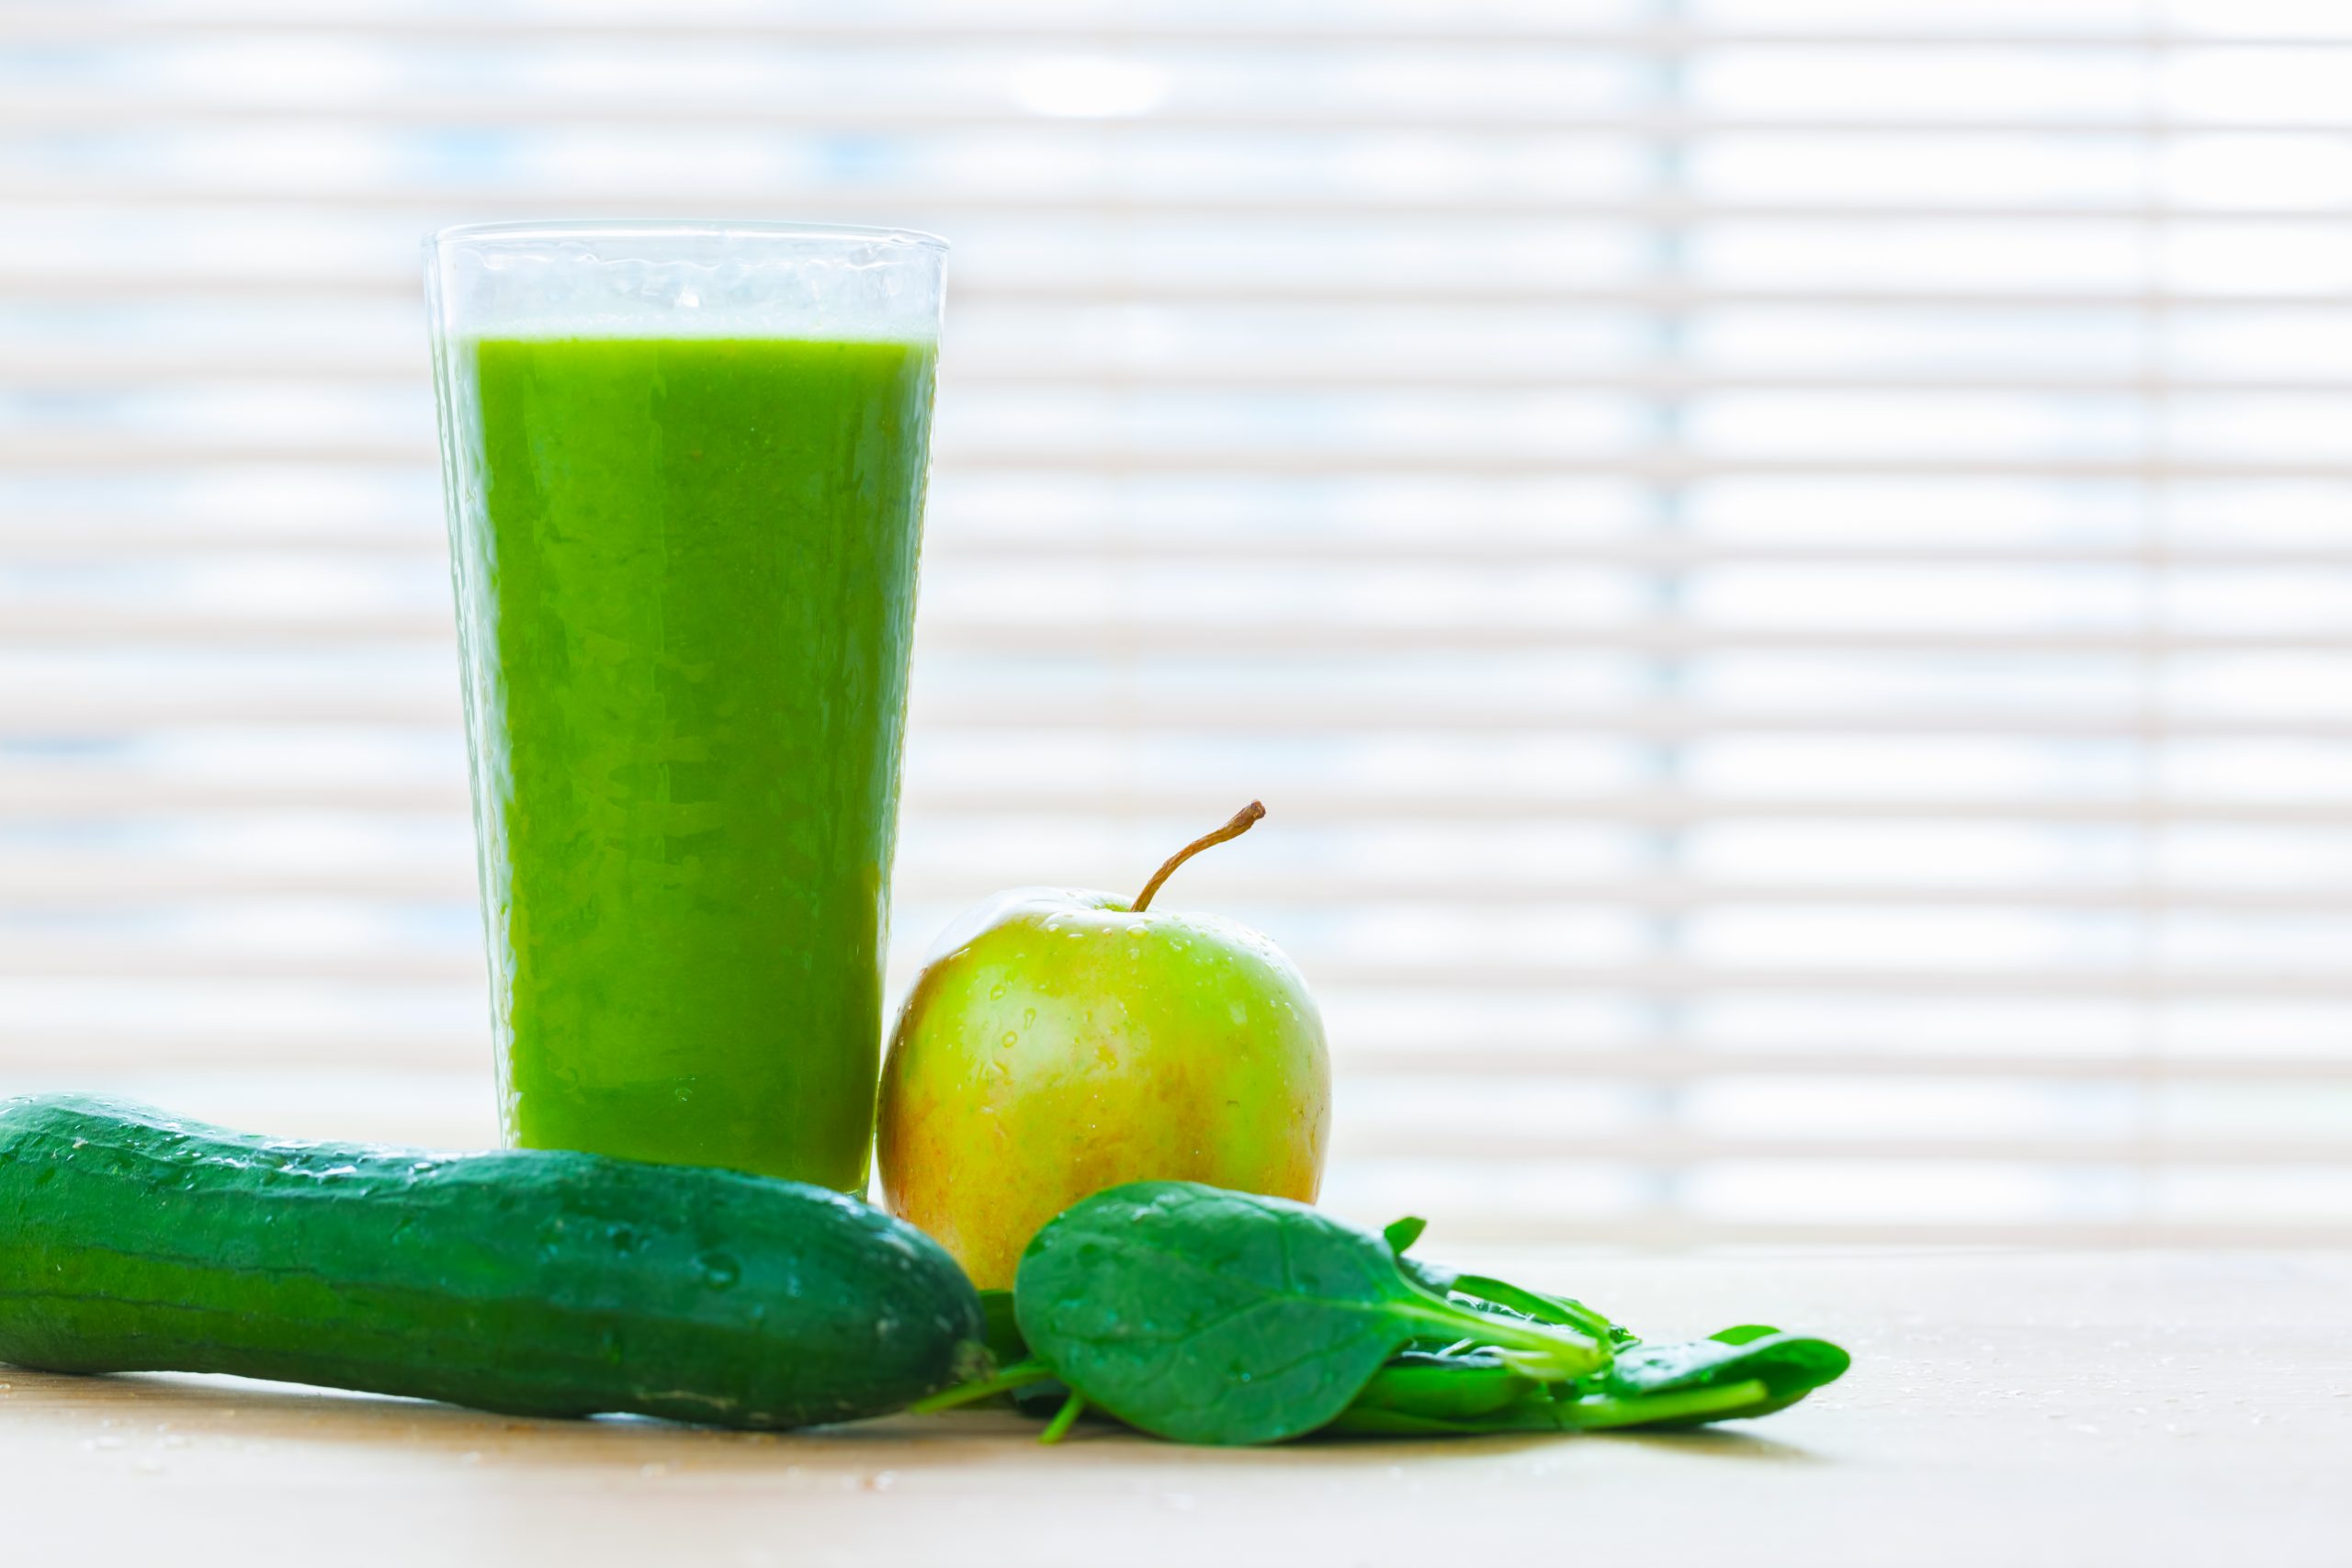 Fresh juice from green vegetables and fruits. Healthy organic and refreshing drink full of vitamins. Full glass with apple, cucumber and spinach leaves.